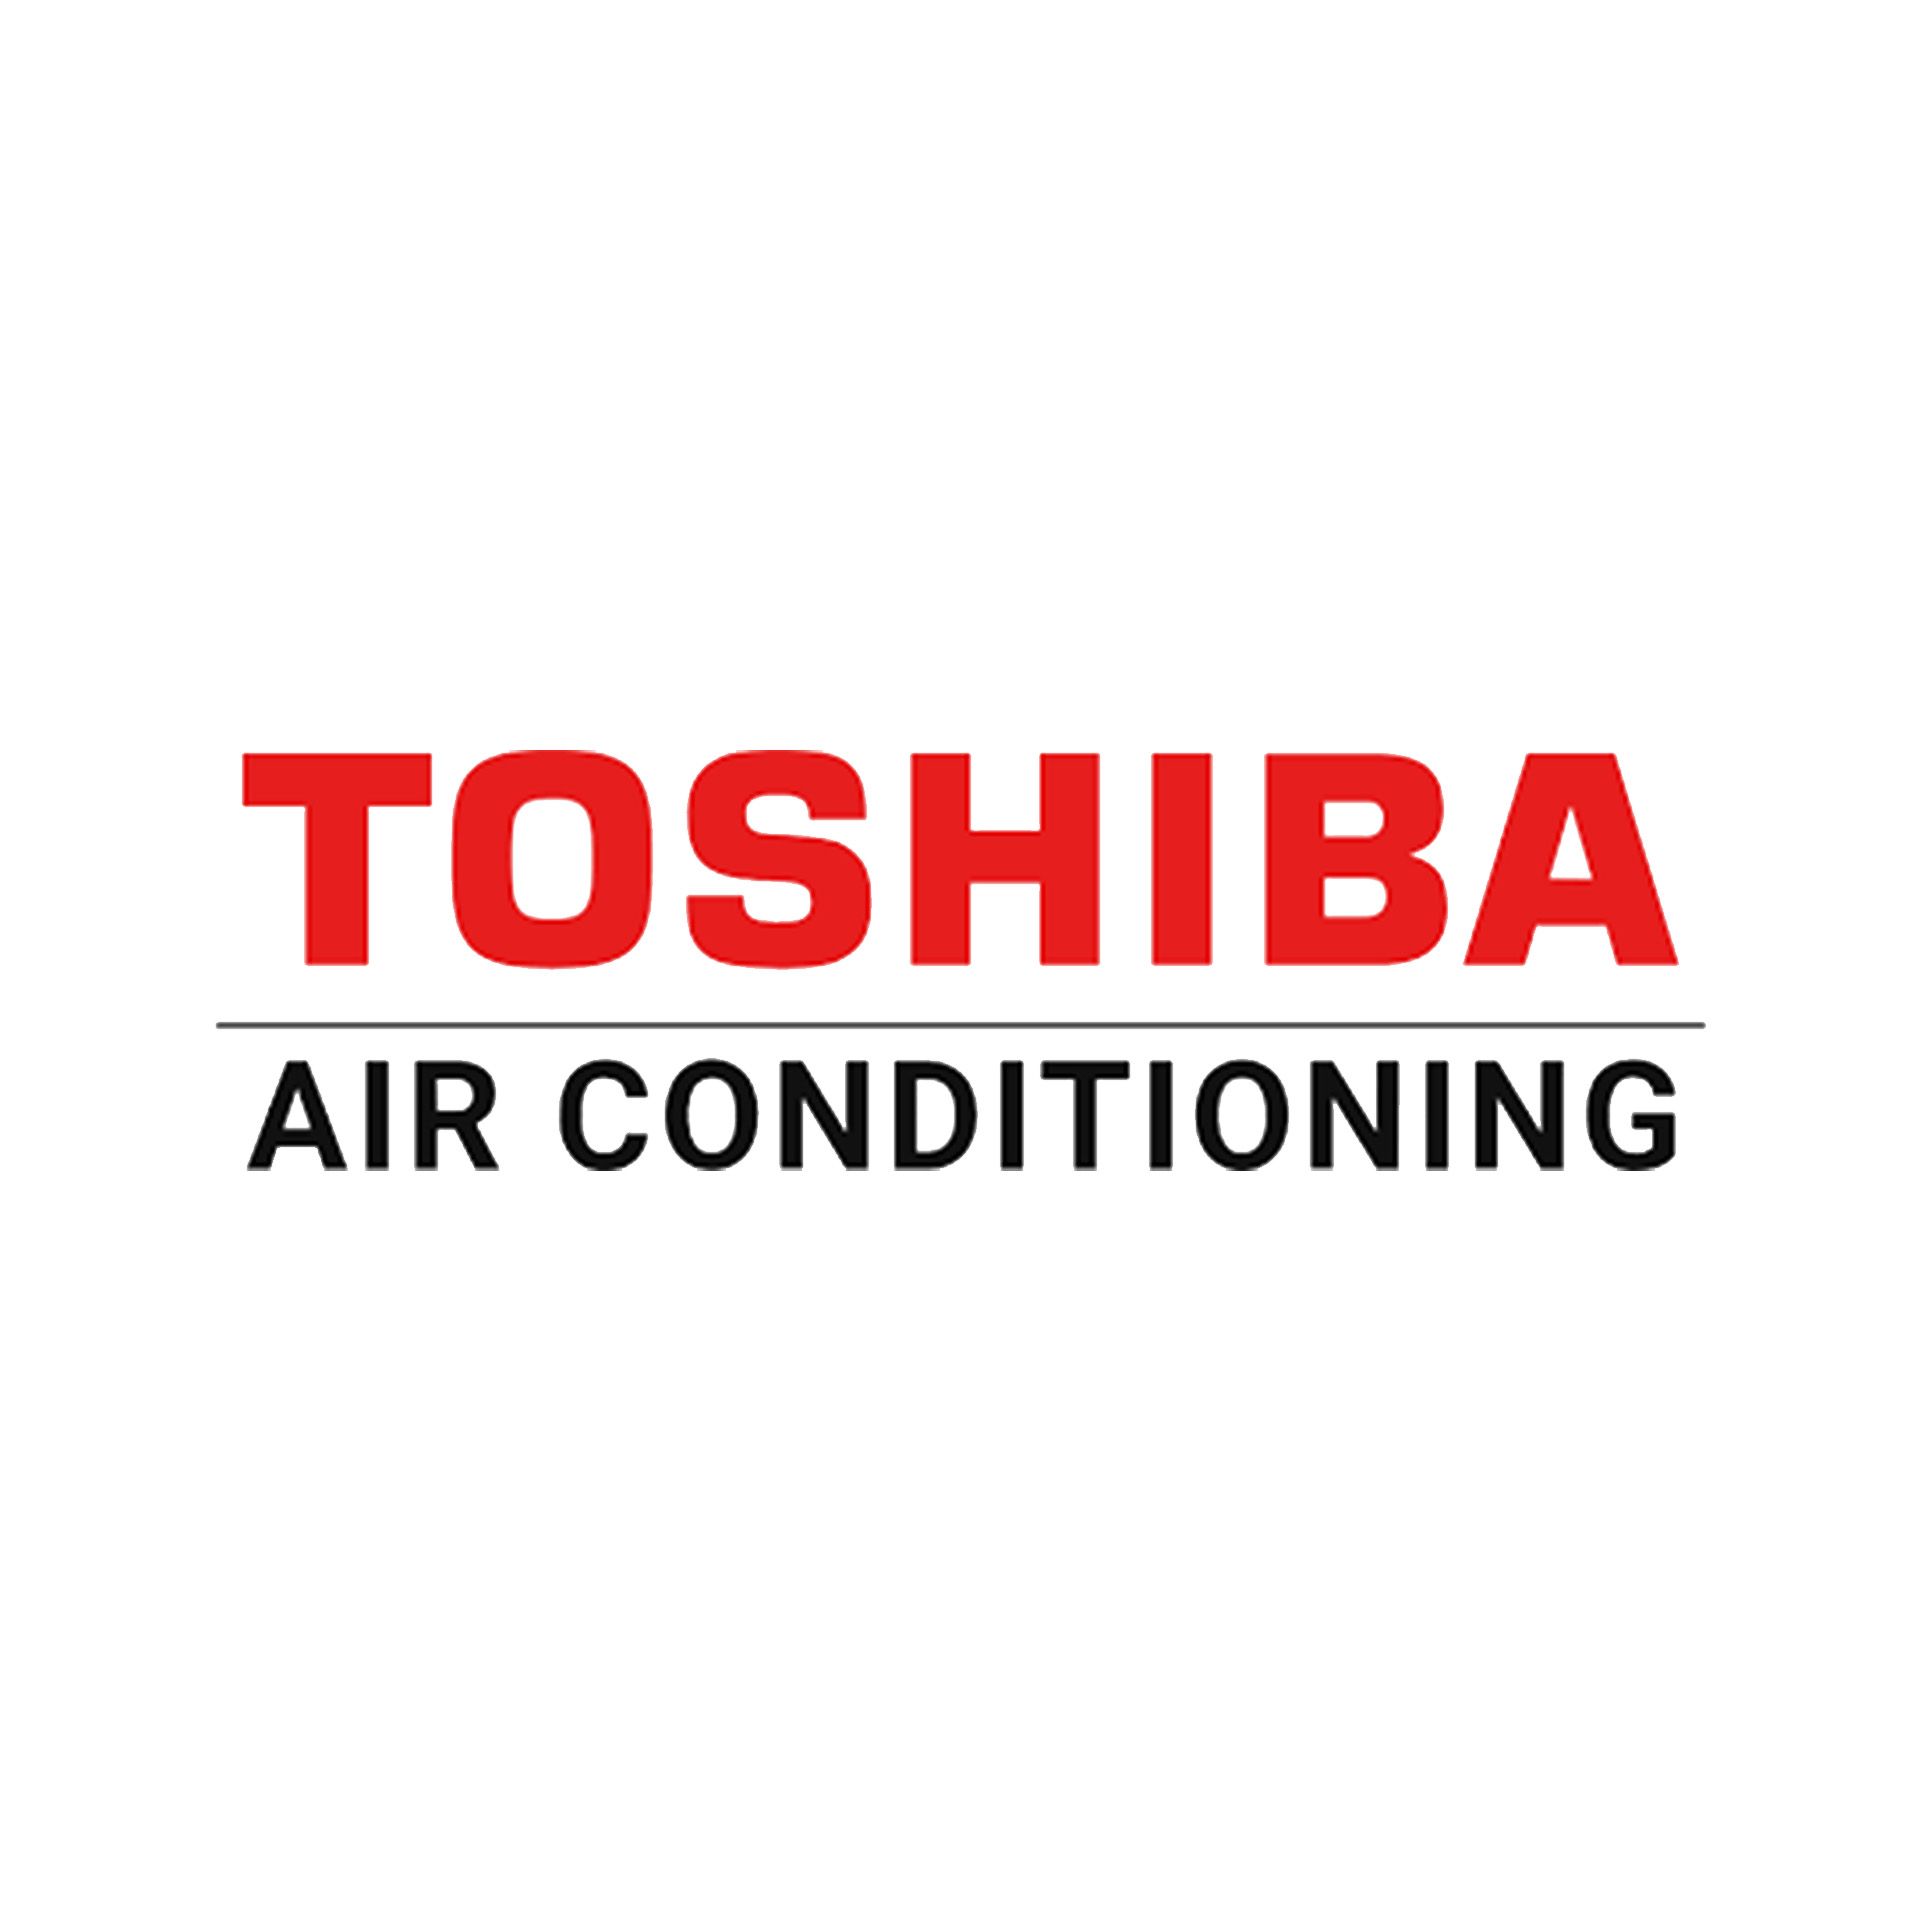 Toshiba Air Conditioning logo on white background